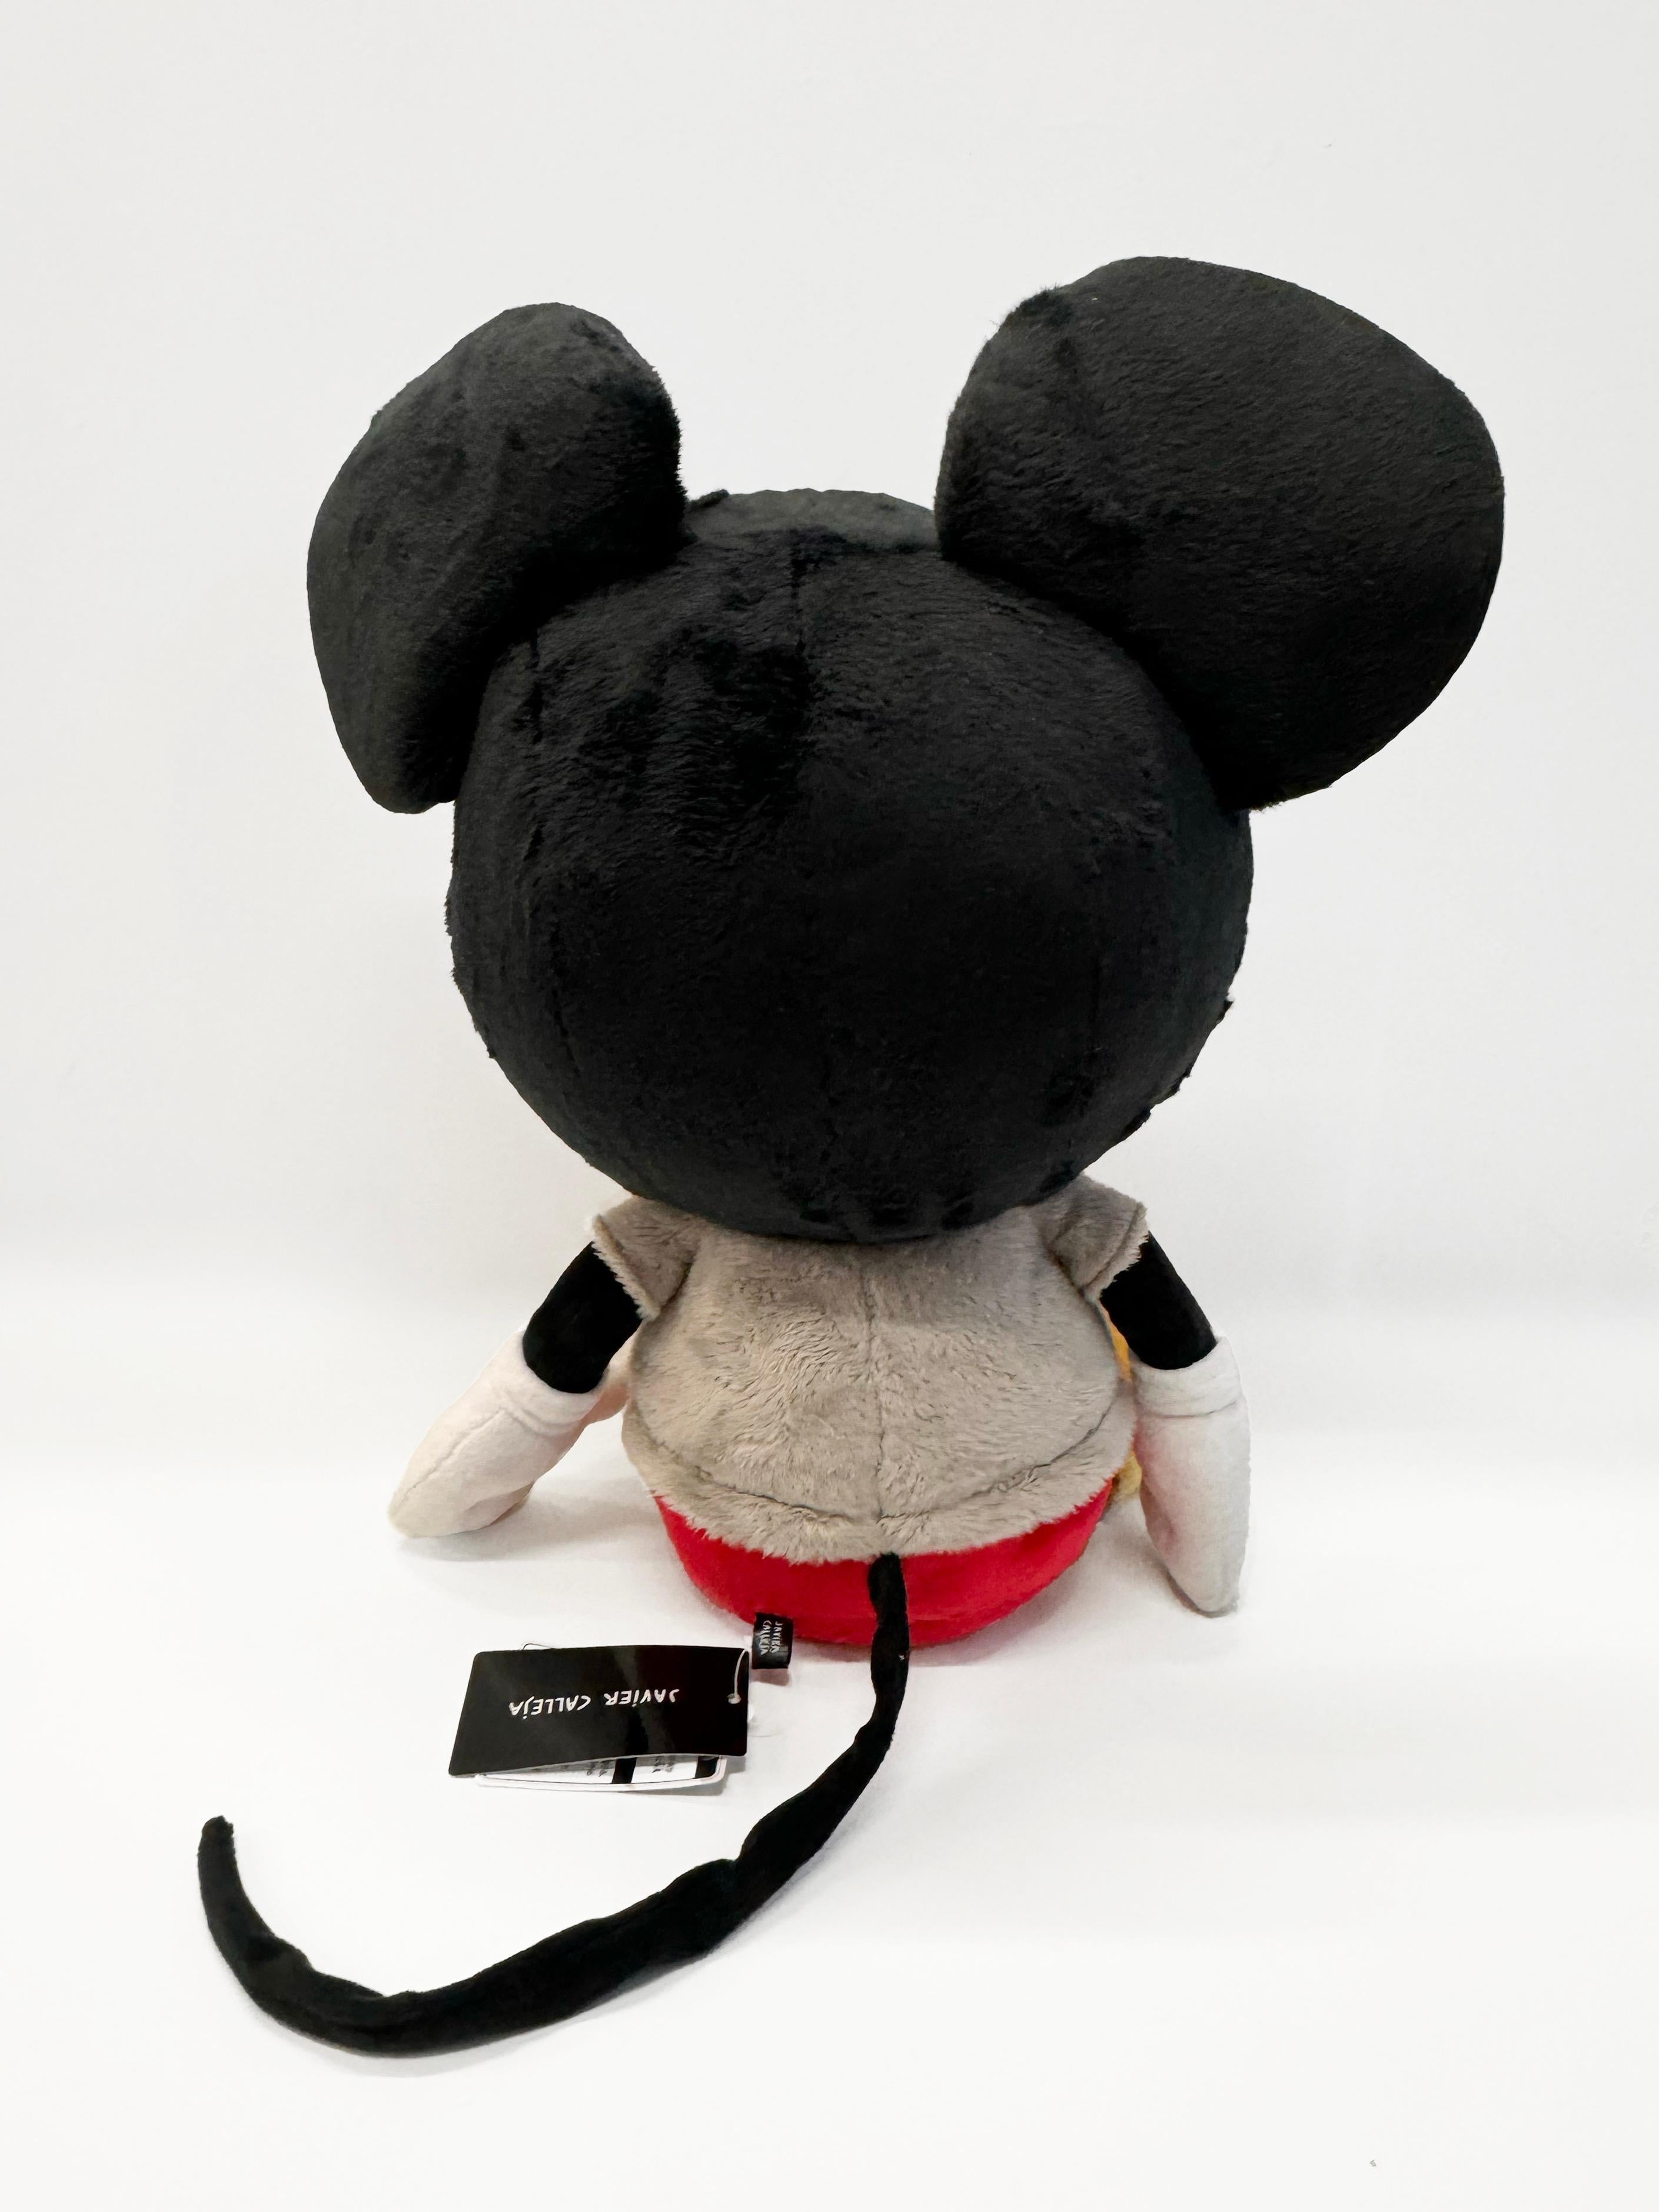 Javier Calleja Little Mickey Plush (set of 2):
Standout, highly decorative limited edition Javier Calleja Mickey Mouse art toys created by Calleja in conjunction with the noted 2021 Japan  exhibition, “Mickey Mouse Now and Future,” at Parco Museum